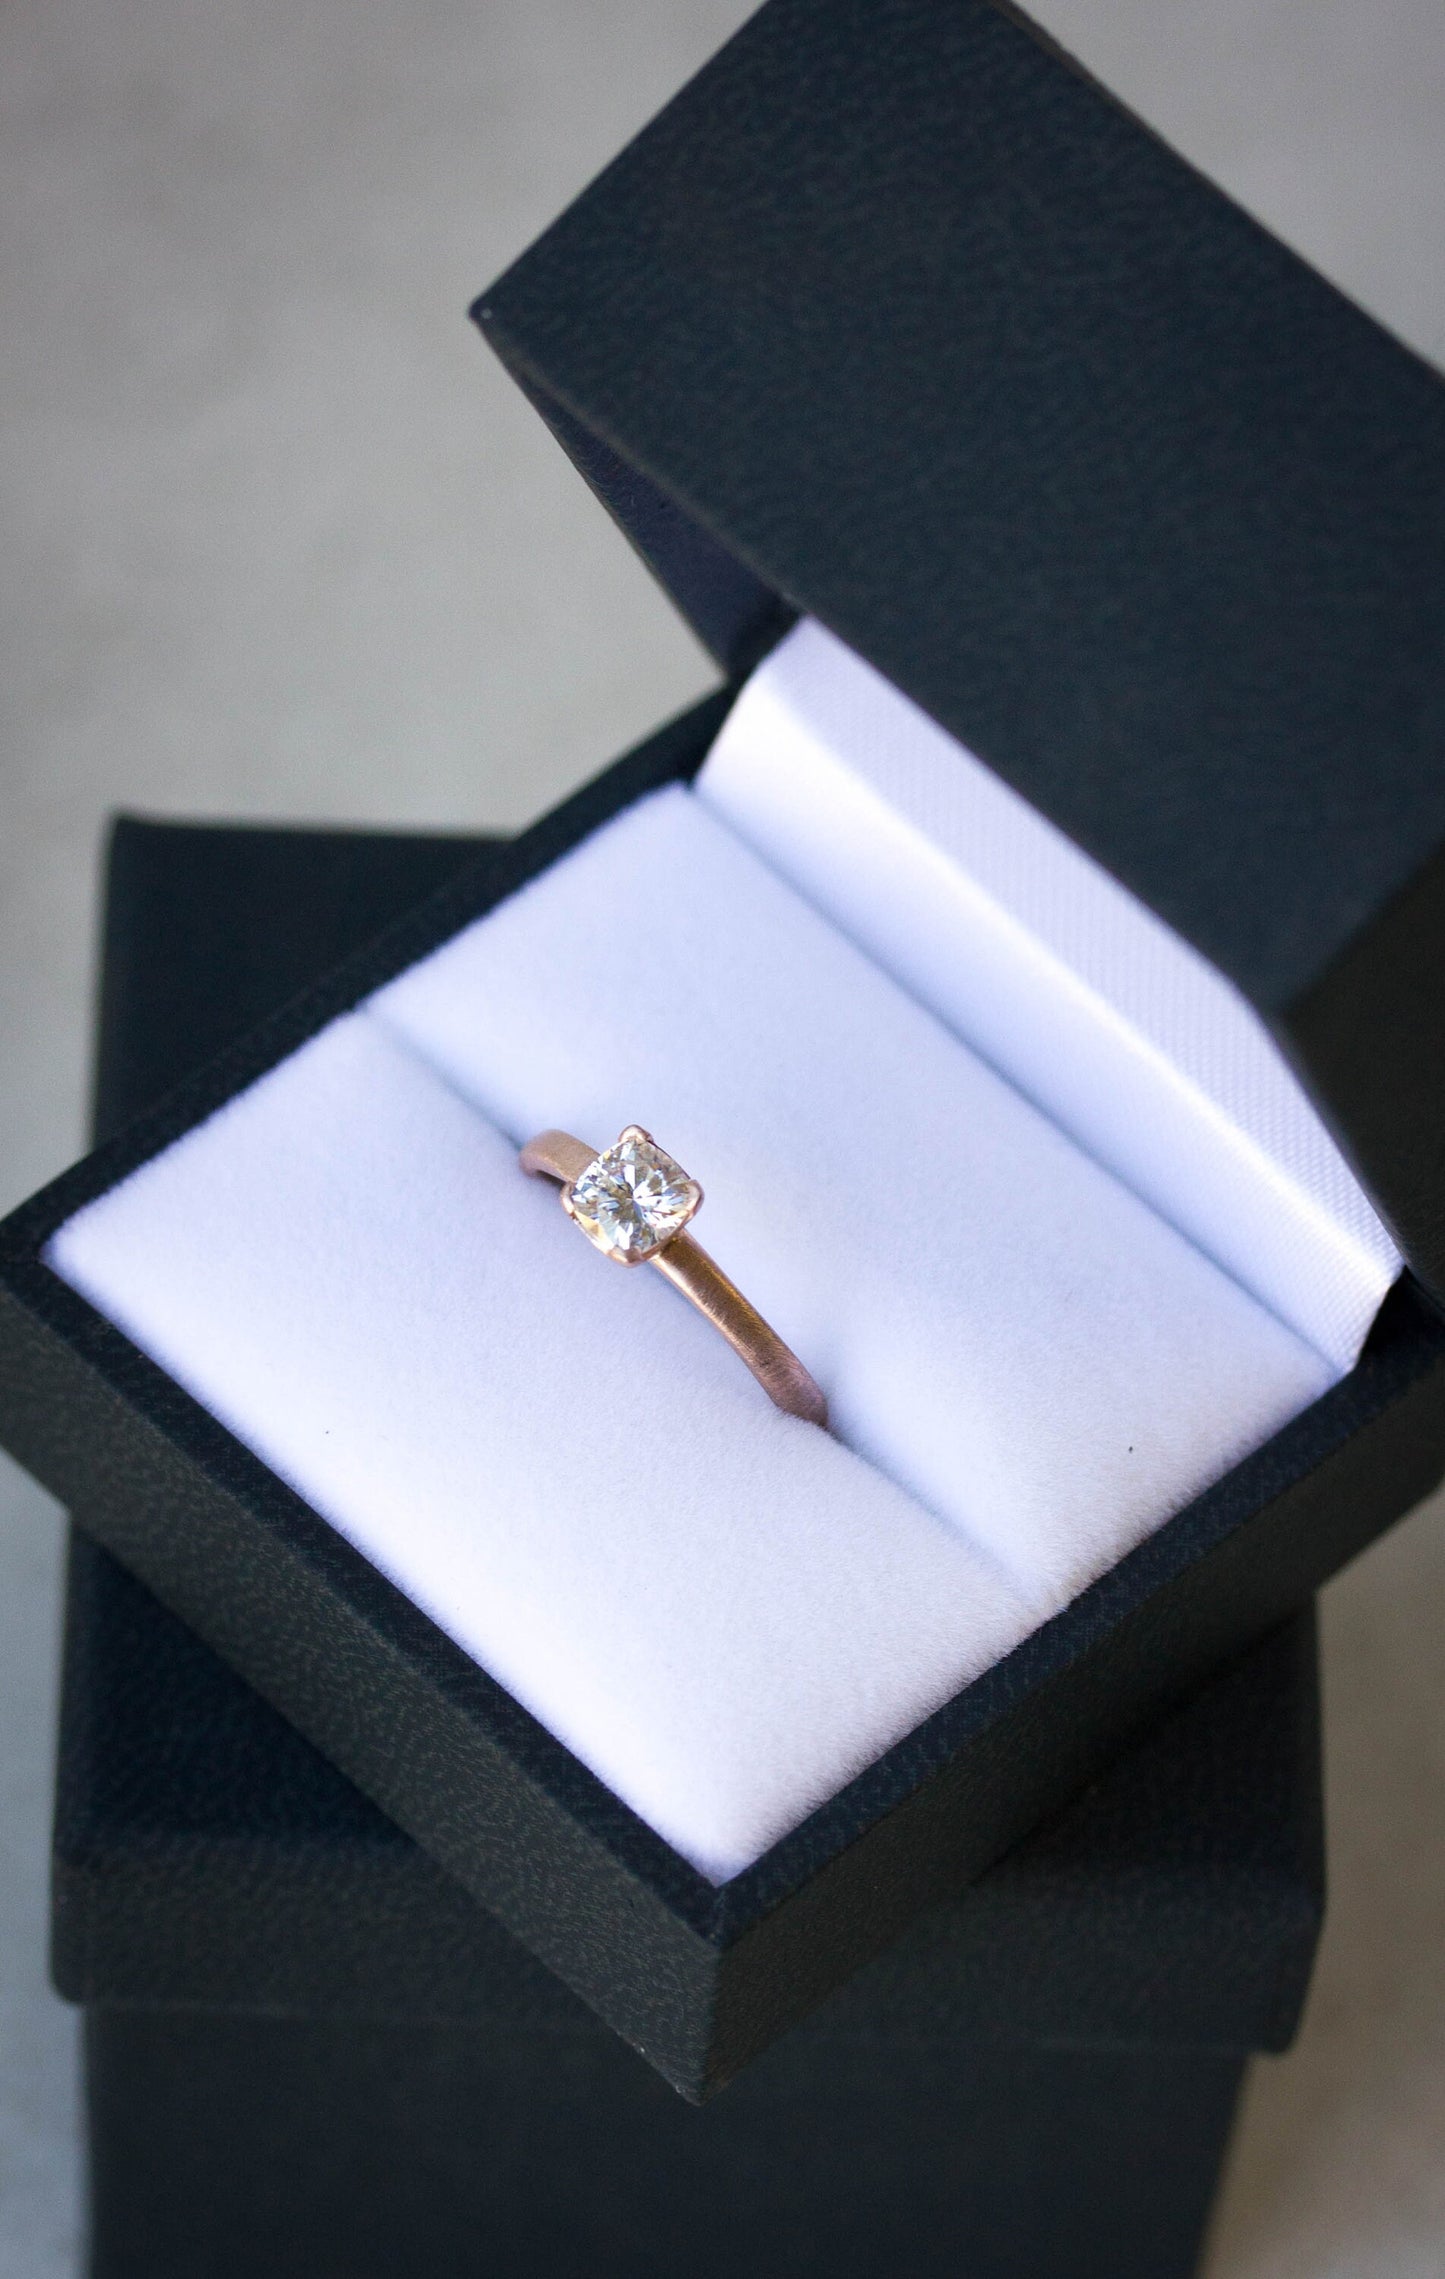 A Handmade White Topaz Engagement Ring by Cassin Jewelry in a black box.